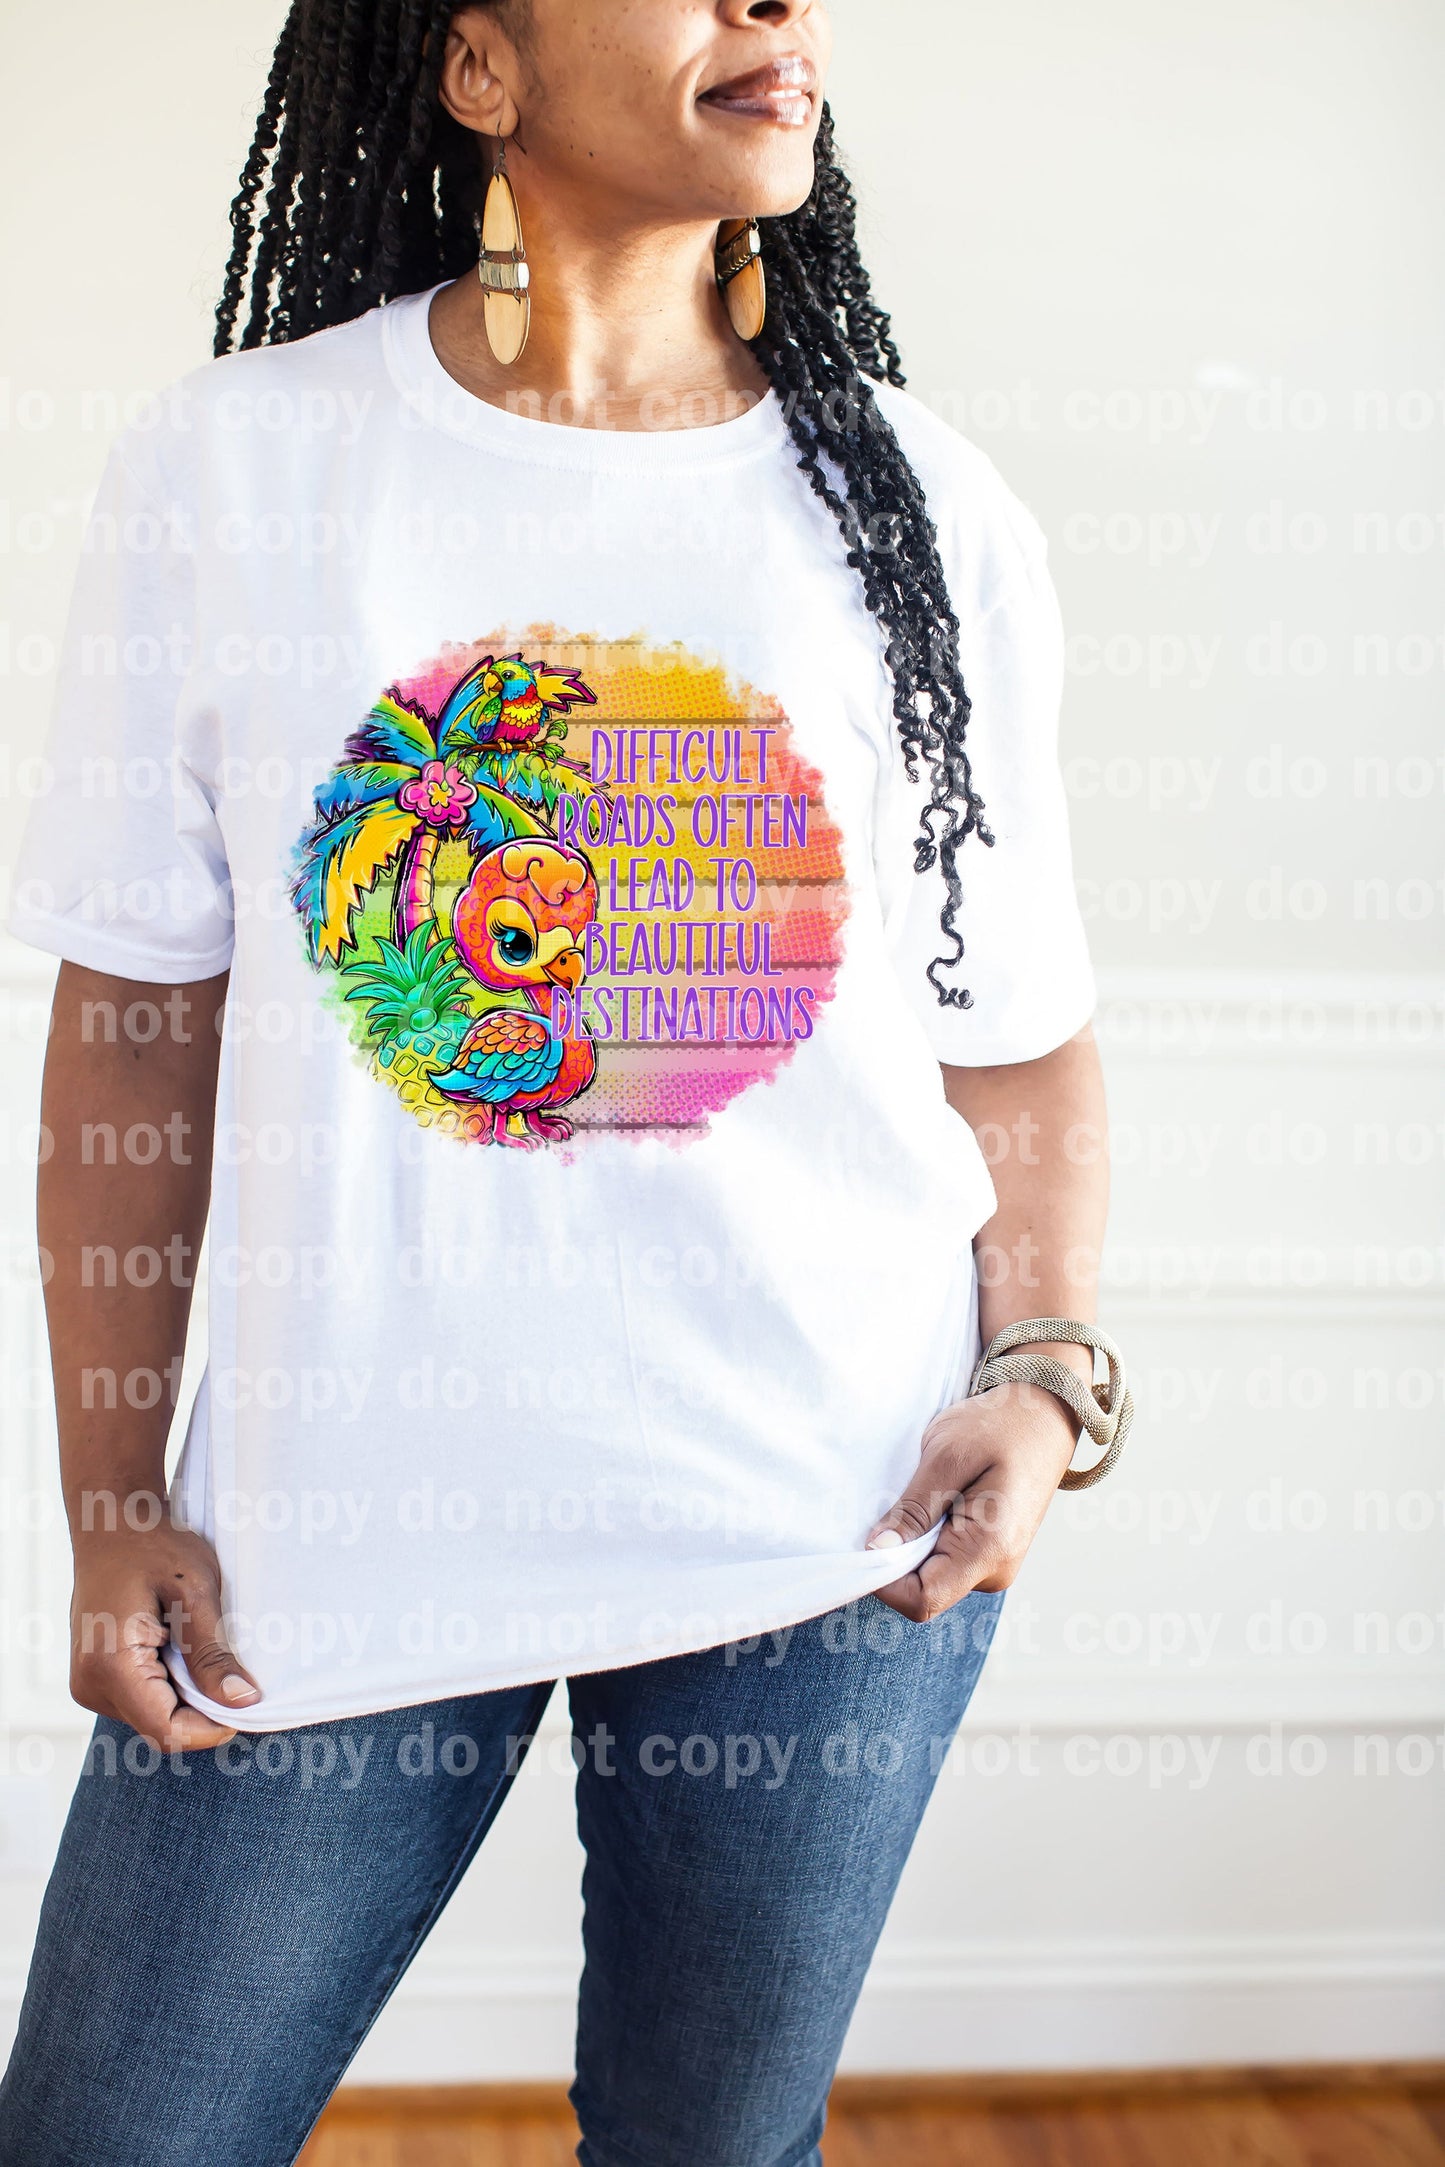 Difficult Roads Often Lead To Beautiful Destinations Dream Print or Sublimation Print